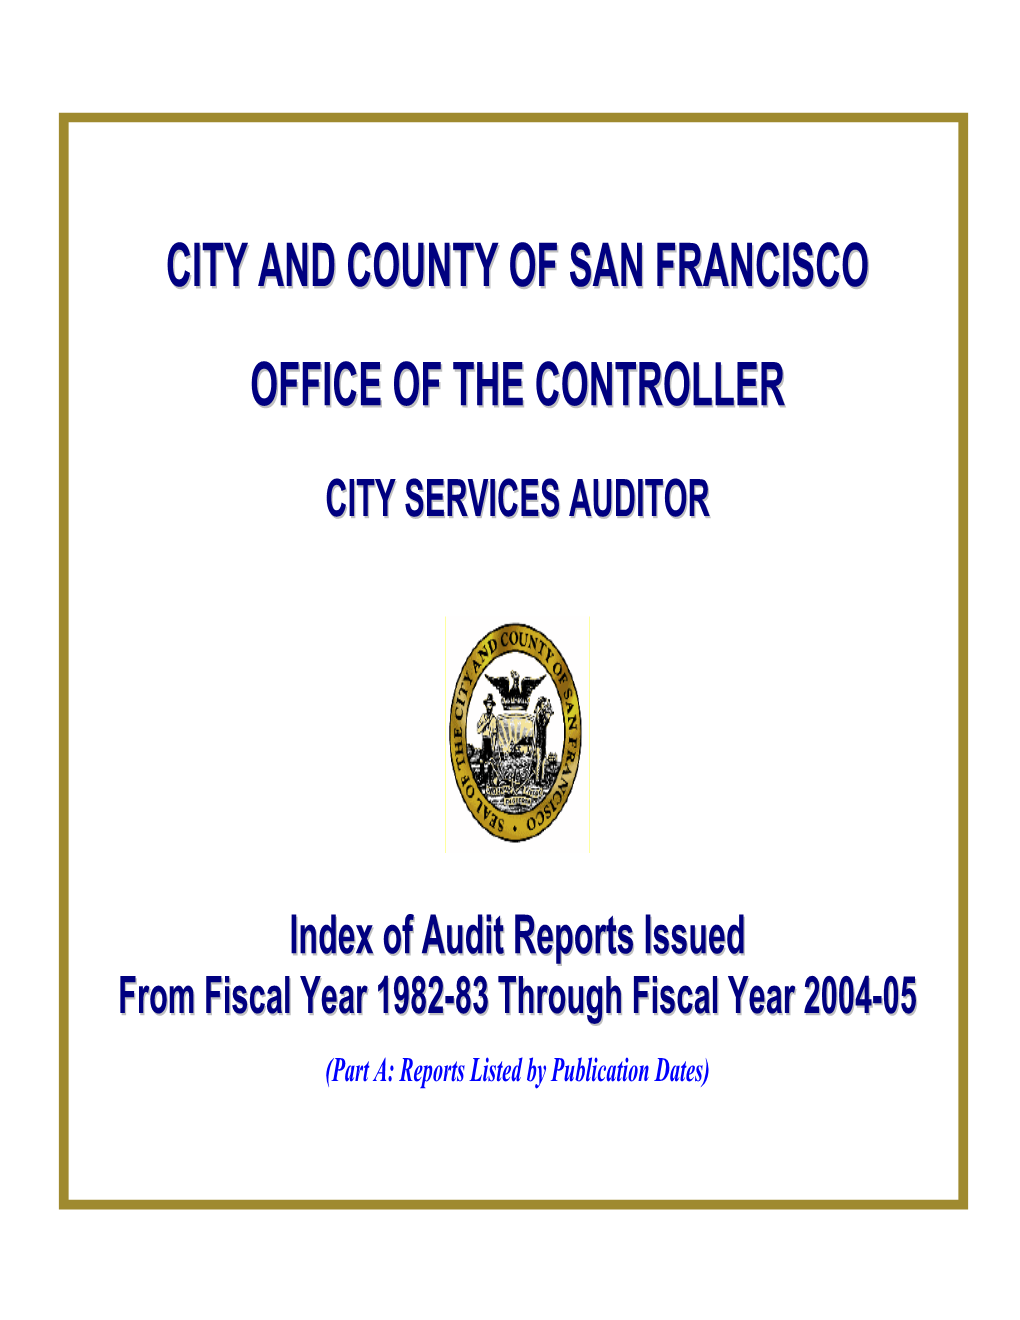 City and County of San Francisco Office of the Controller